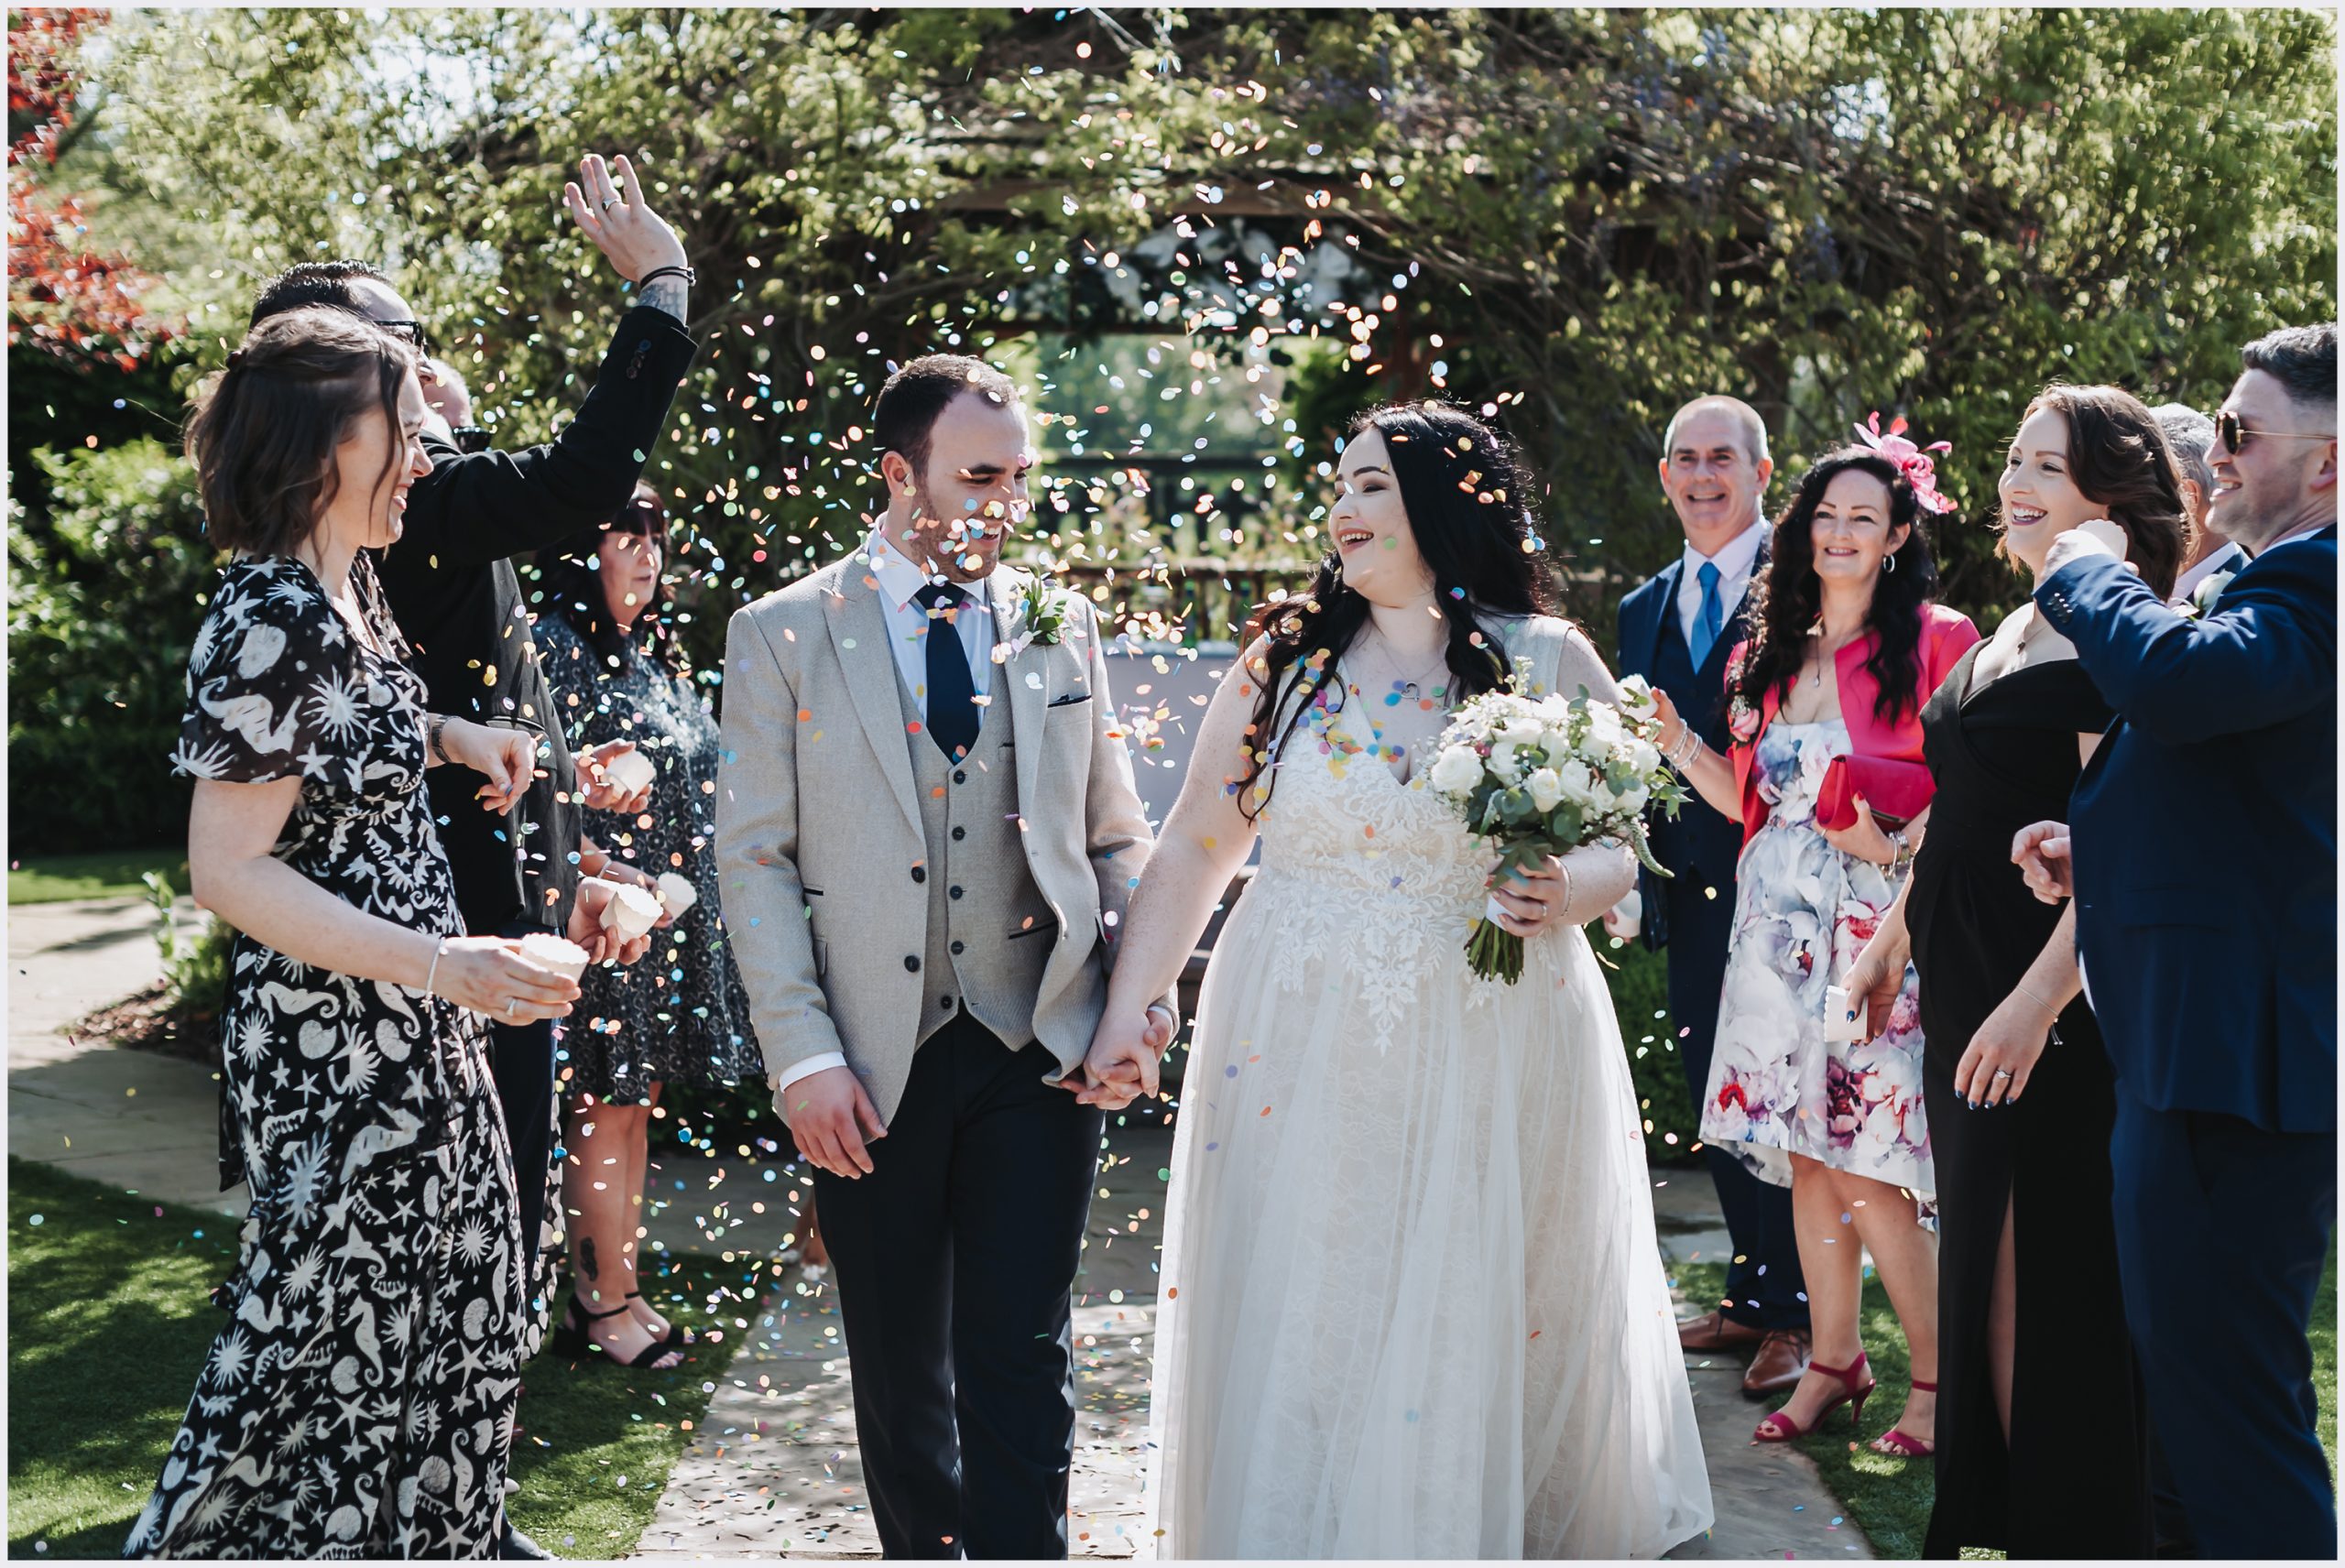 A beautiful bride and her groom smile and laugh as guests throw confetti over them at Pryors Hayes Golf Clun in Cheshire.  Image captured by Cheshire Wedding Photographer Helena Jayne Photography